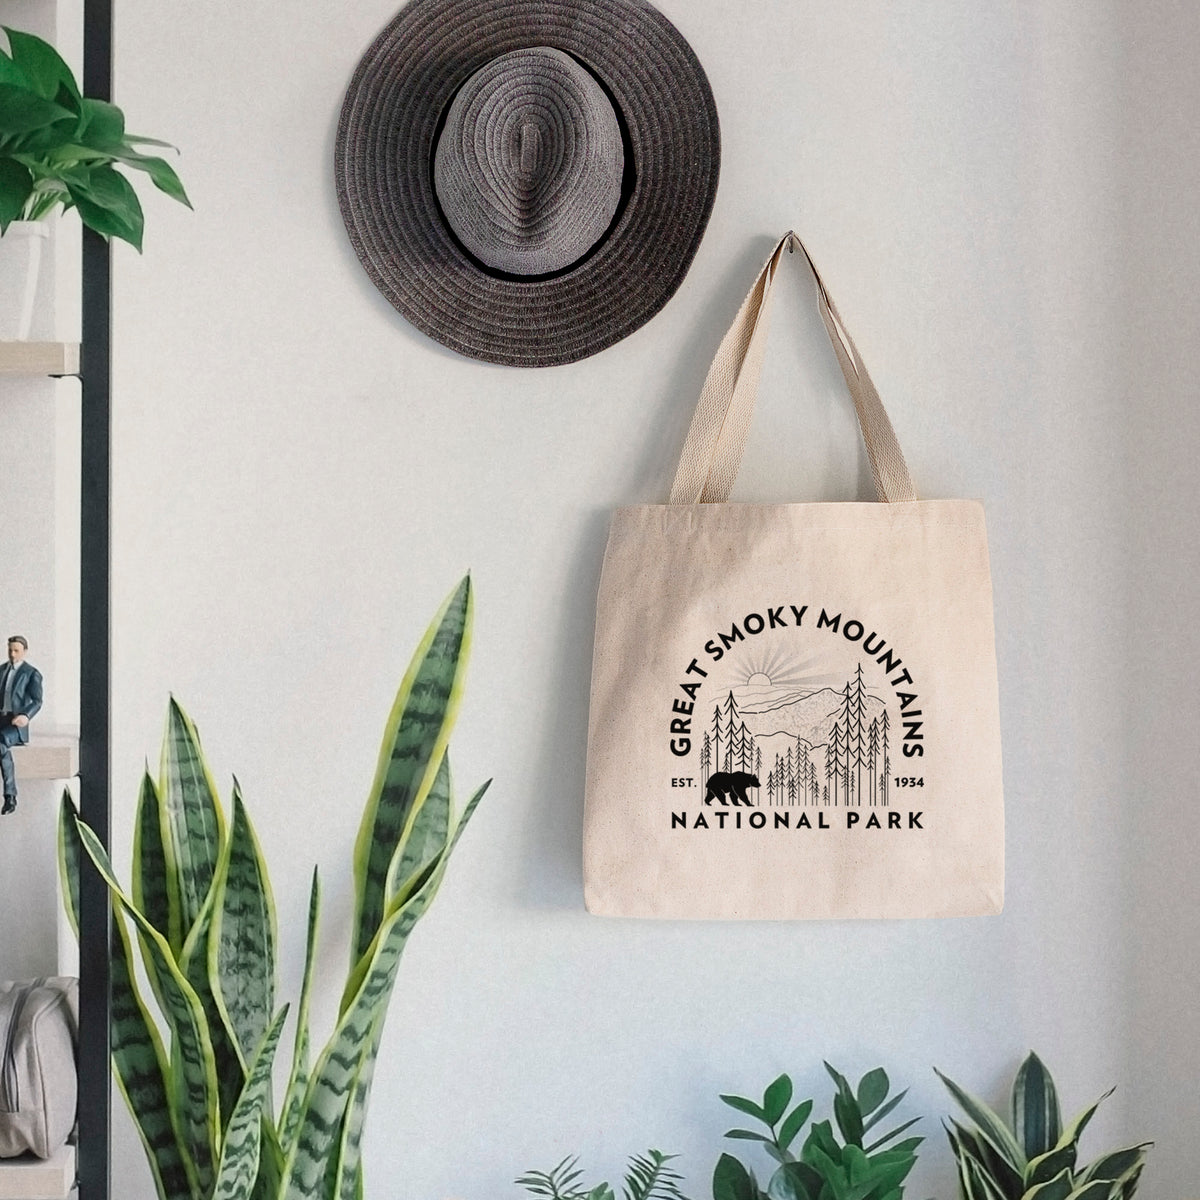 Great Smoky Mountains National Park - Tote Bag